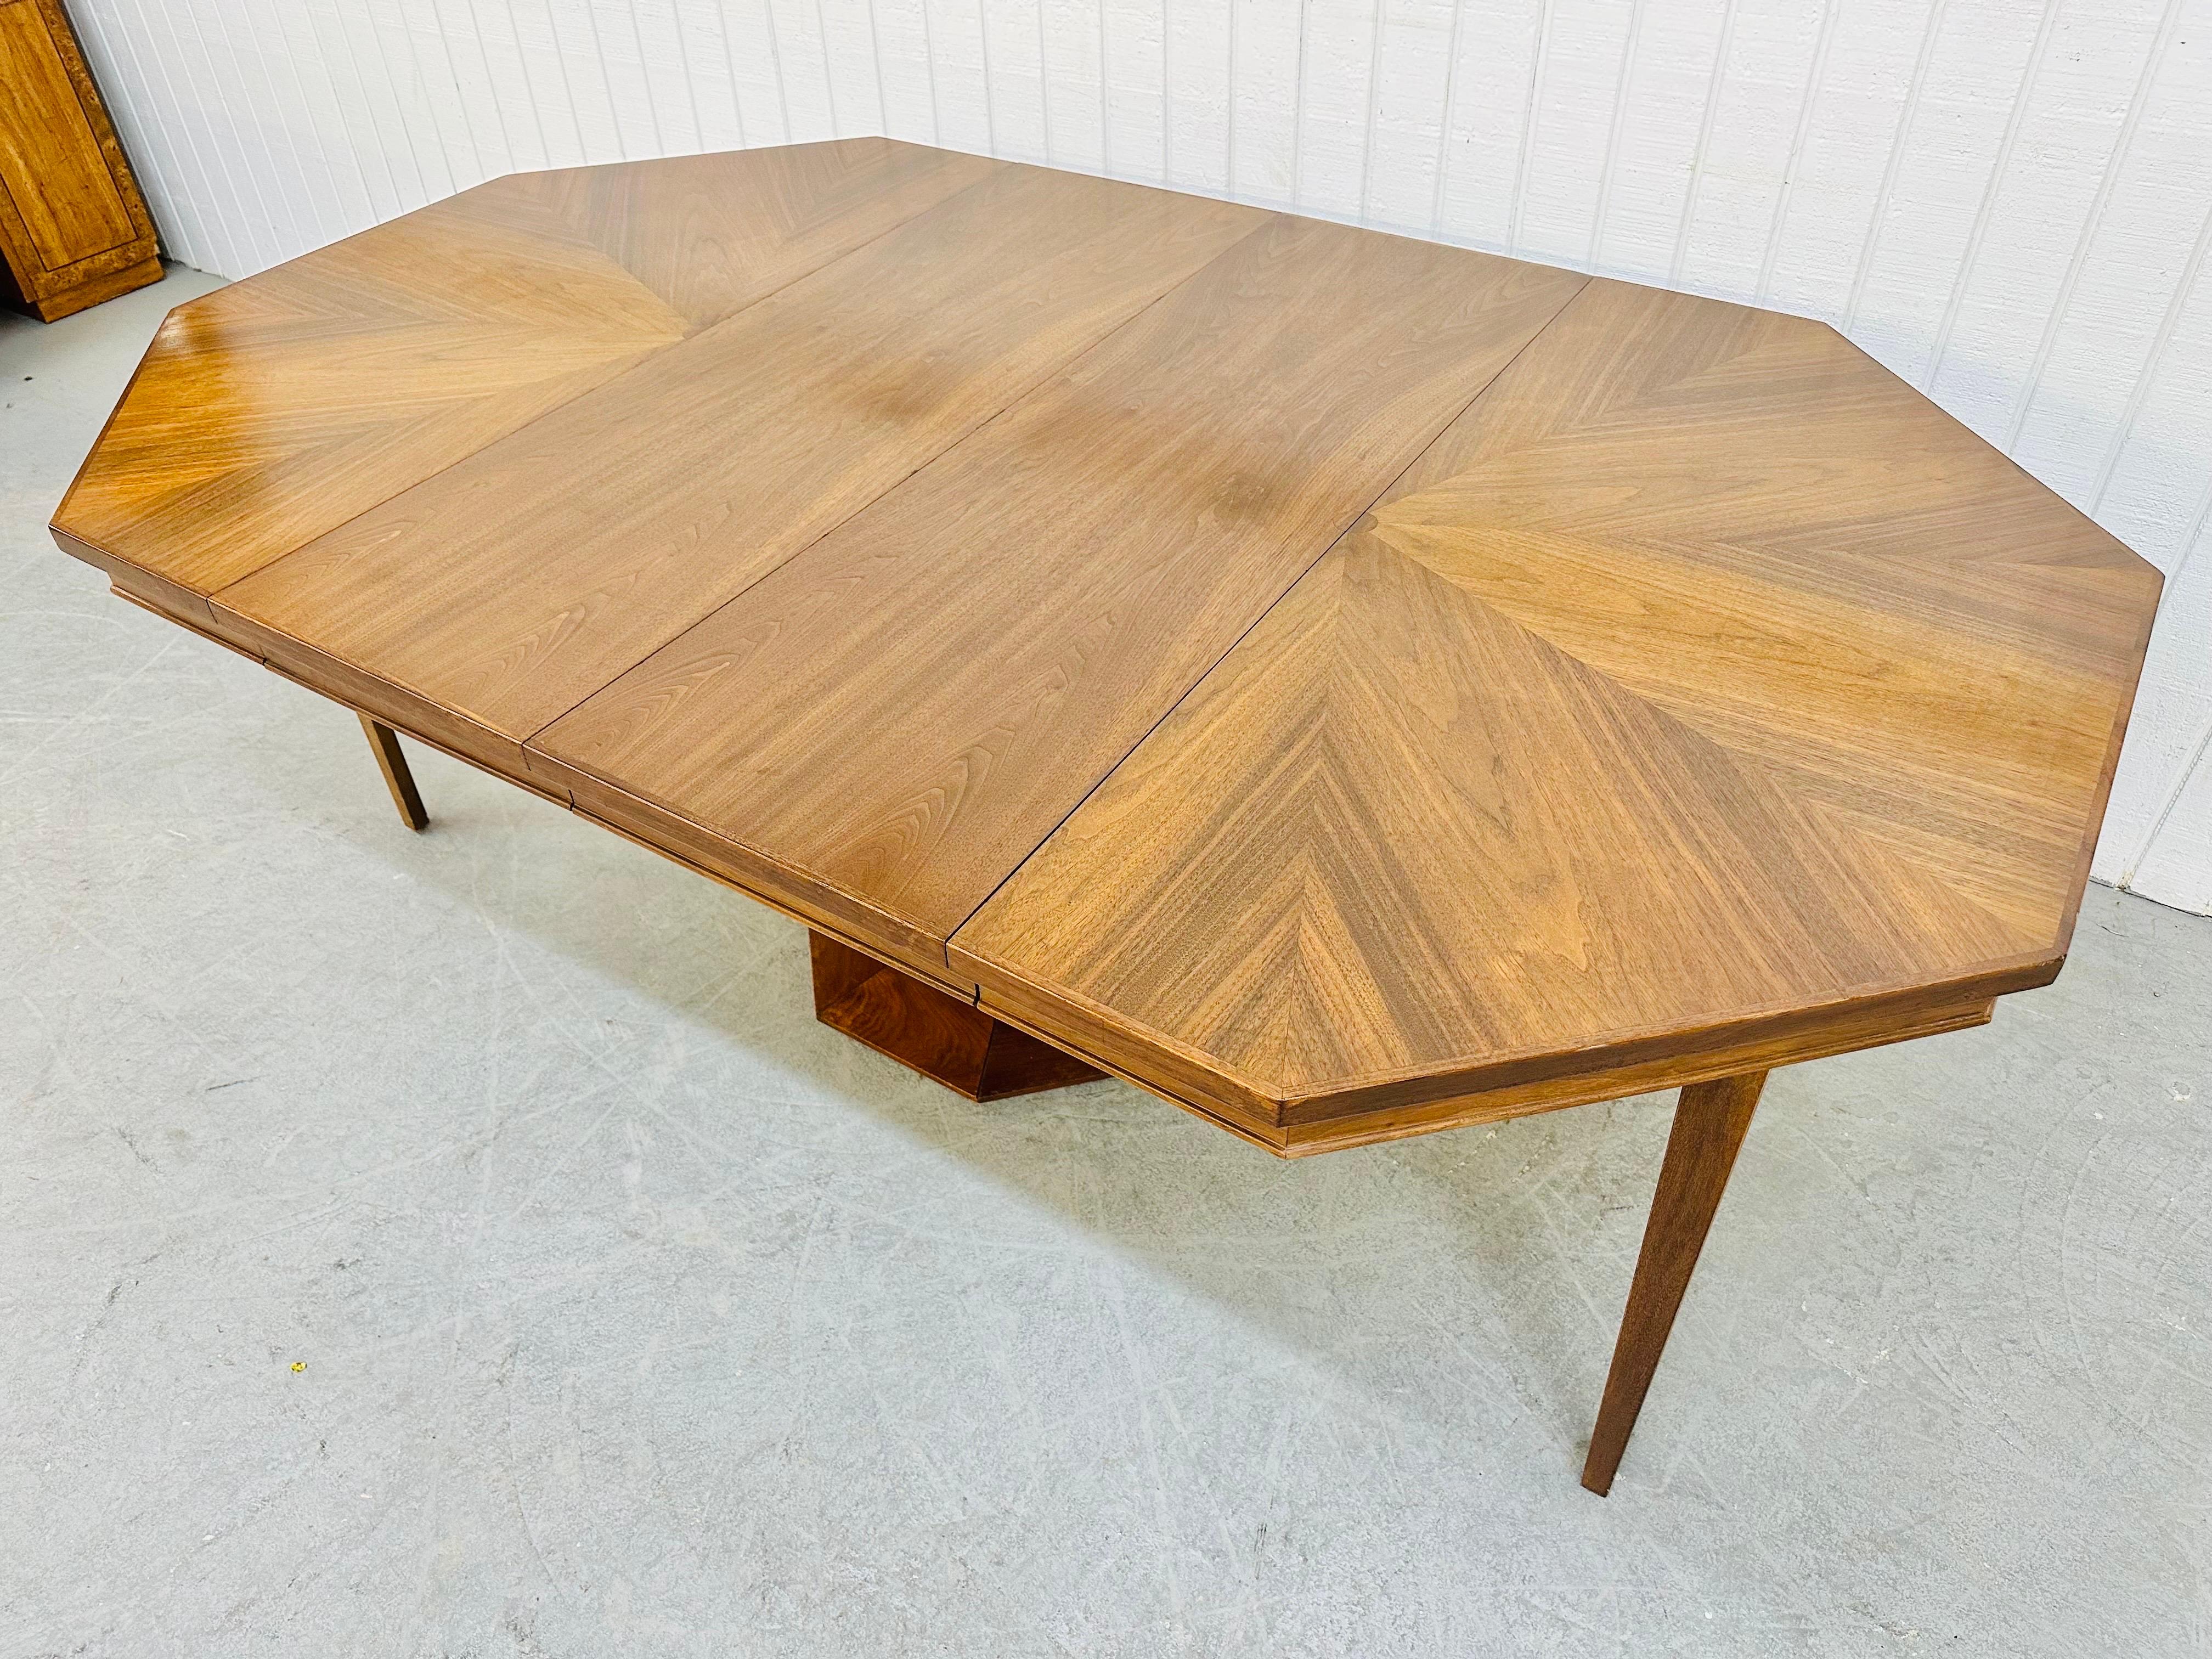 This listing is for a Mid-Century Modern Harvey Probber Style Octagonal Walnut Dining Table. Featuring a top that extends up to 79.5” L with two leafs inserted, hidden corner legs that drop down for extra support, and a unique shaped center walnut